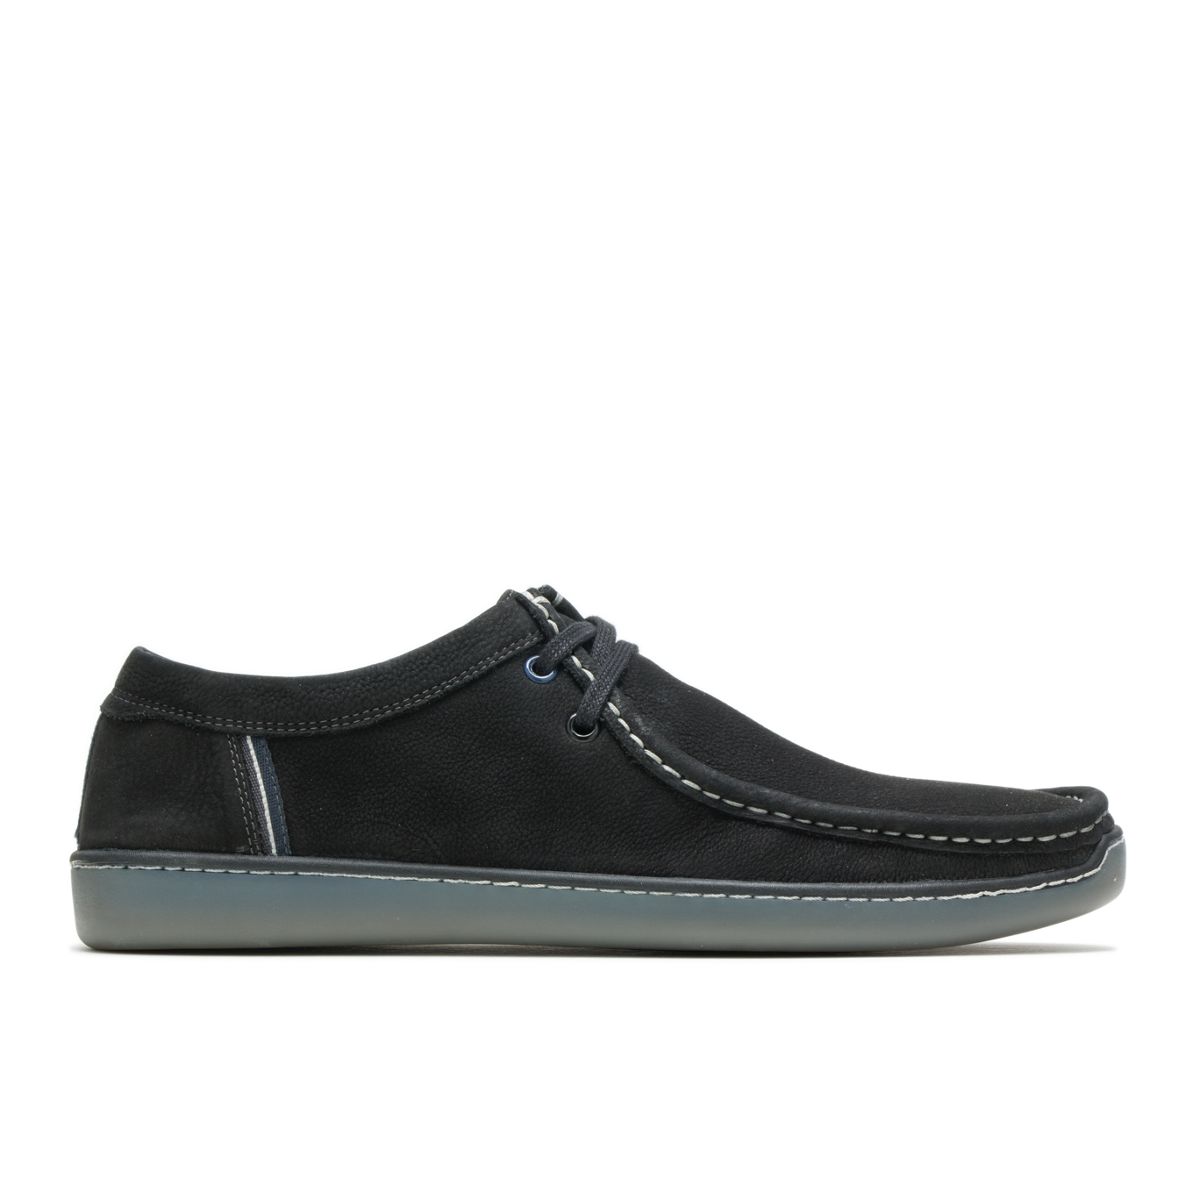 Men - Toby Oxford - Oxfords | Hush Puppies